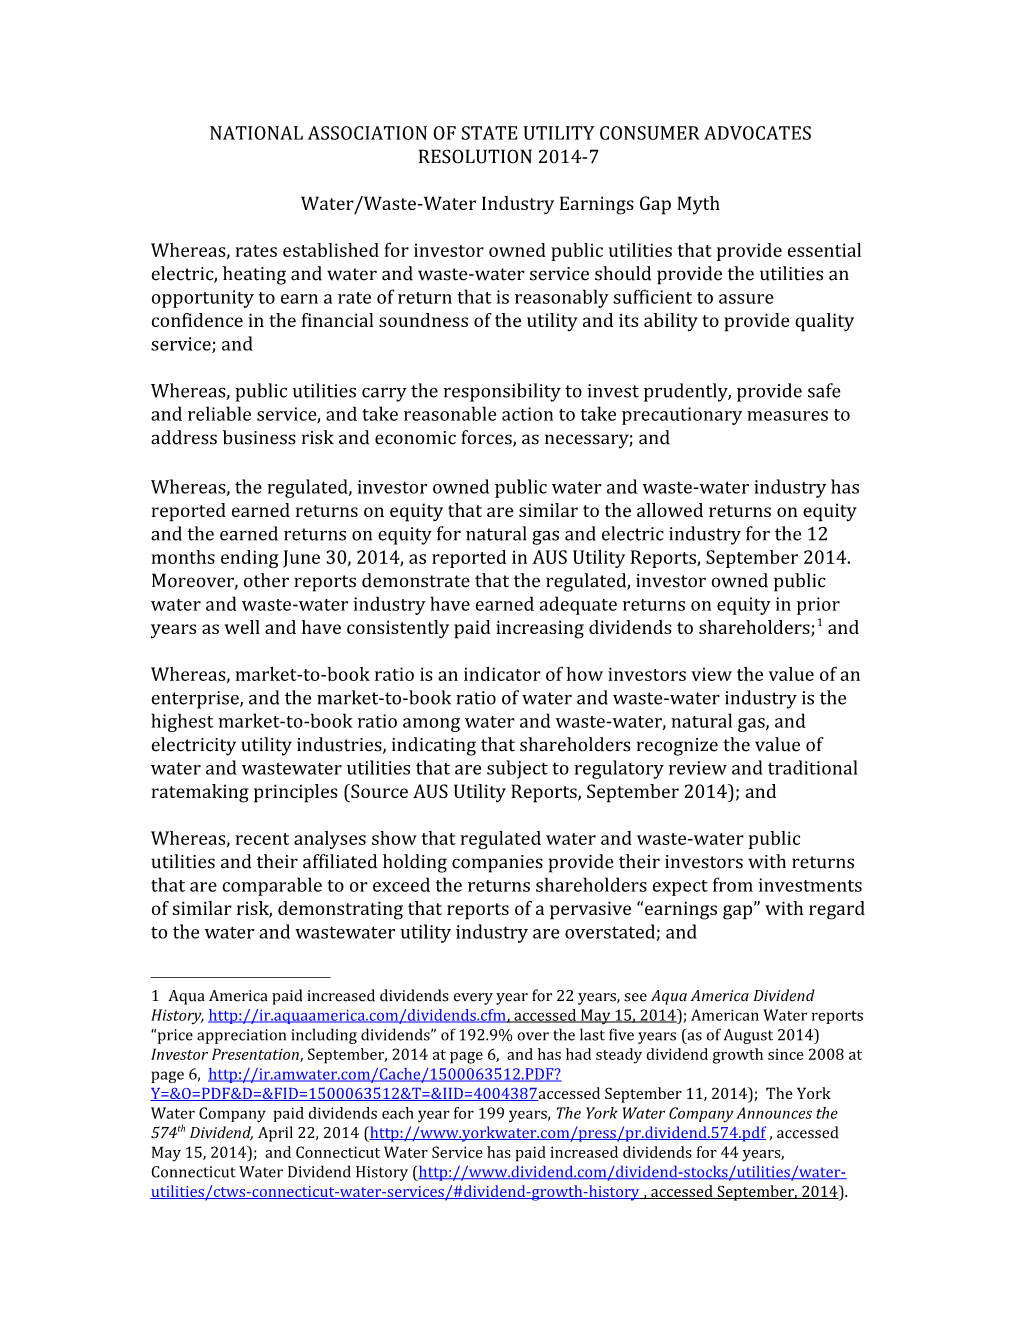 National Association of State Utility Consumer Advocates Resolution 2014-7